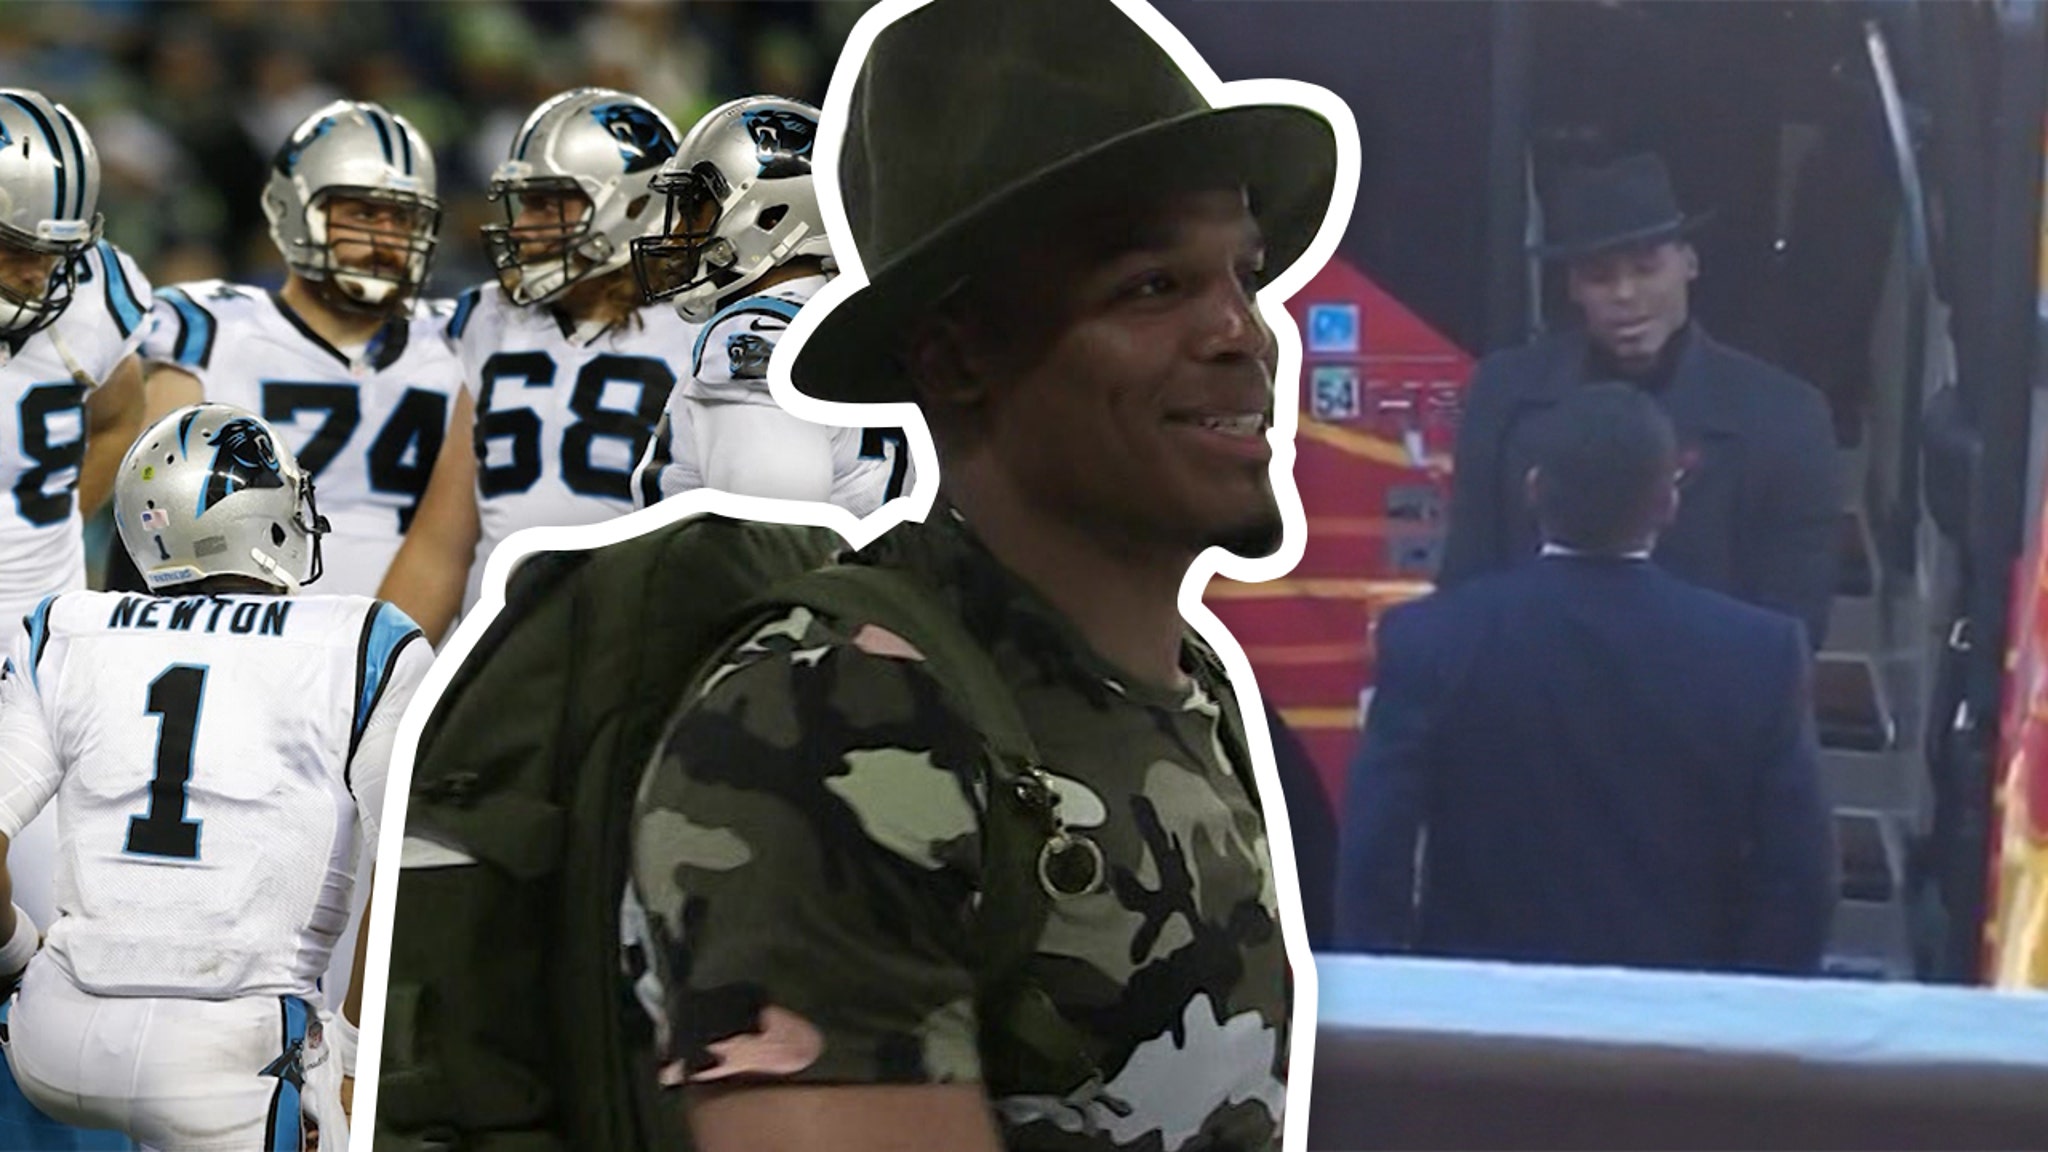 Cam Newton Confronted By Ron Rivera Over Dress Code Violation.